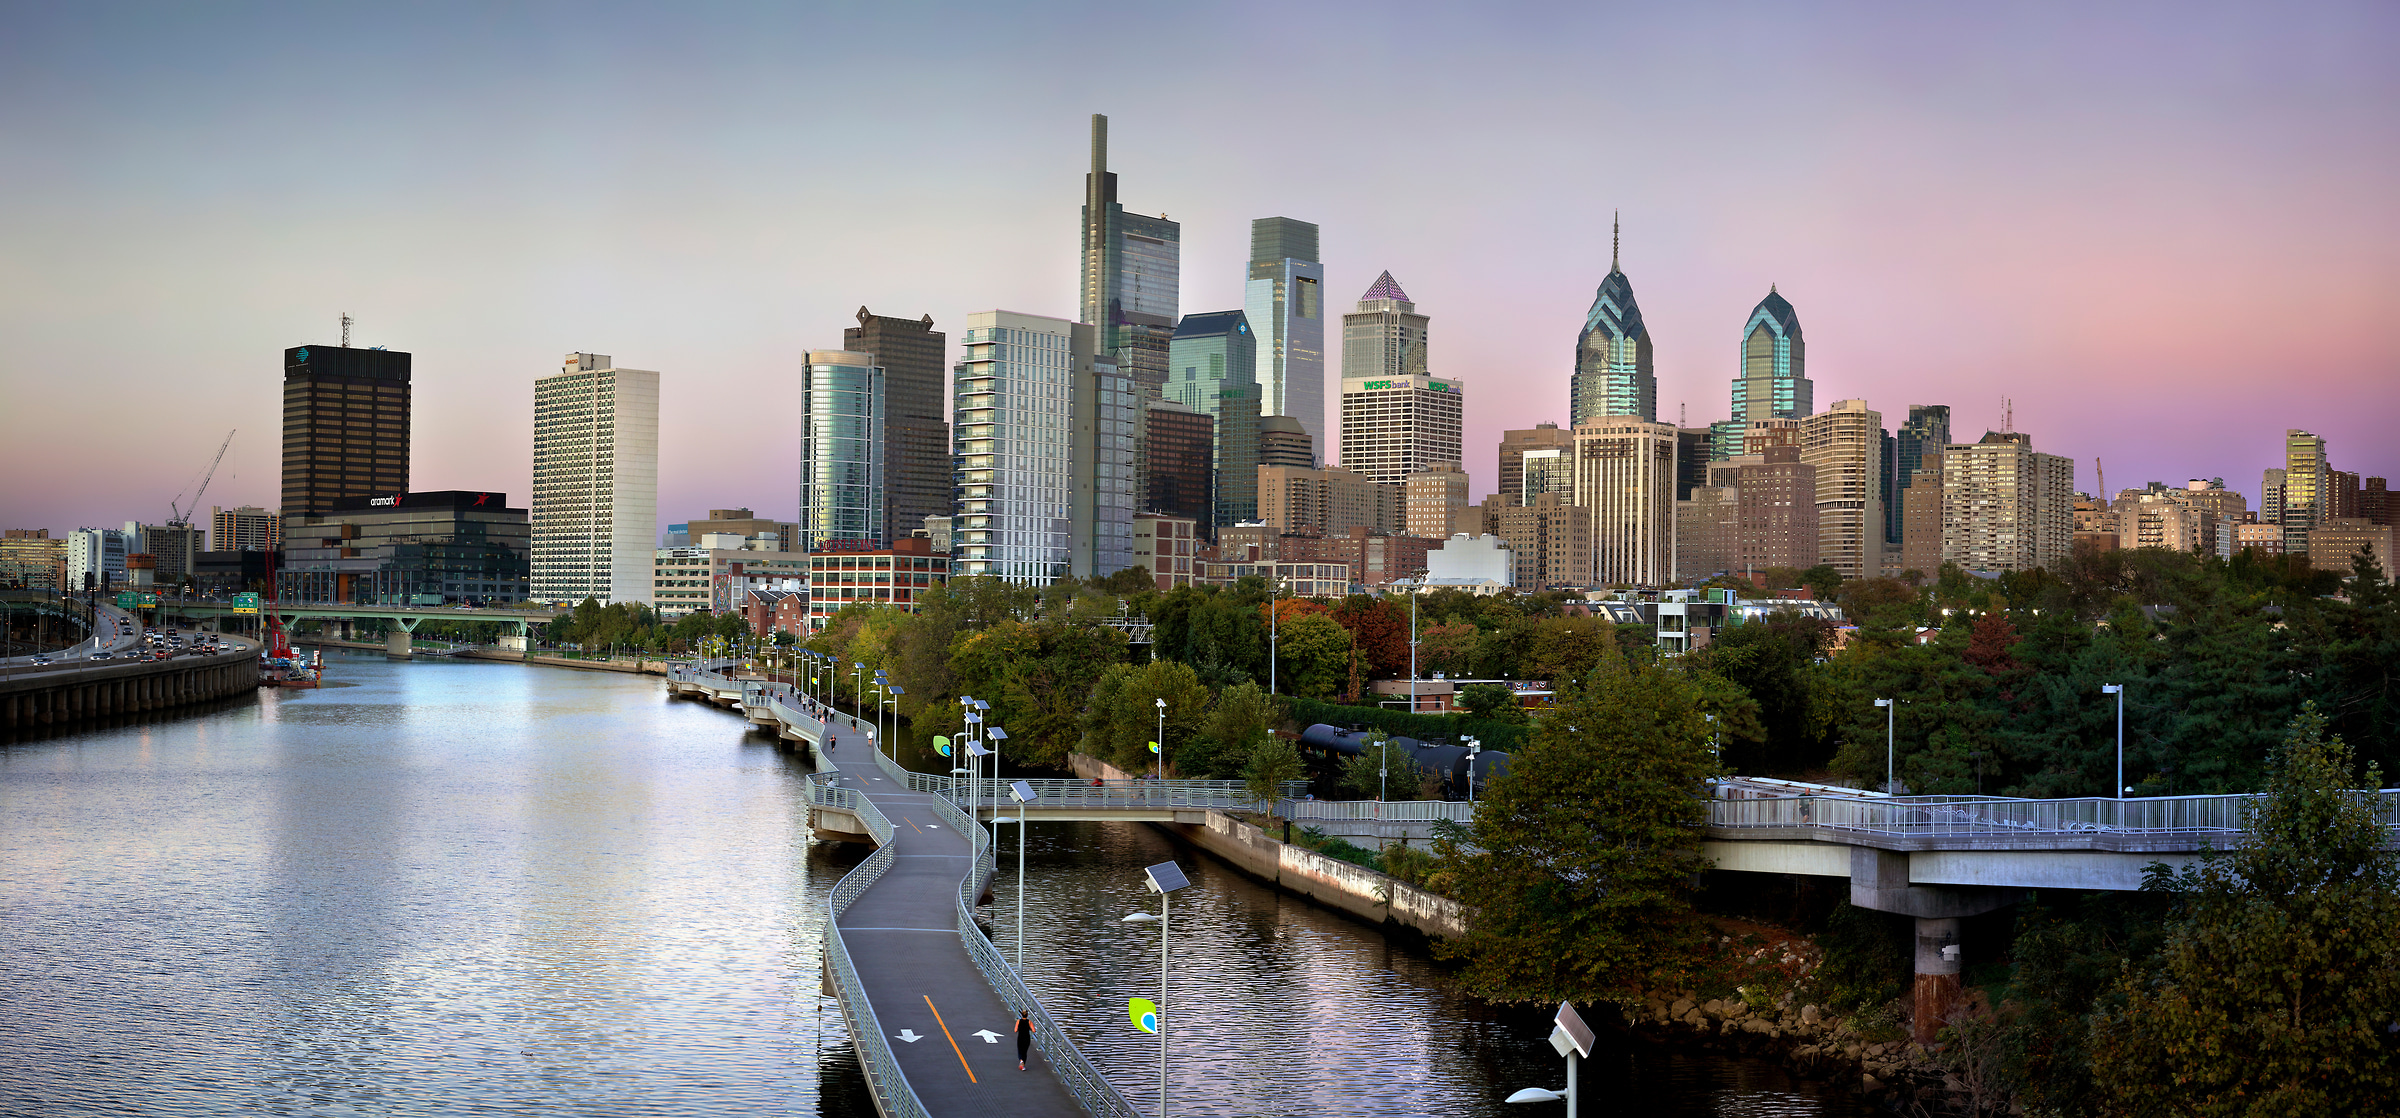 419 megapixels! A very high resolution, large-format VAST photo print of the Philadelphia skyline; photograph created by Phil Crawshay in Downtown Philadelphia.